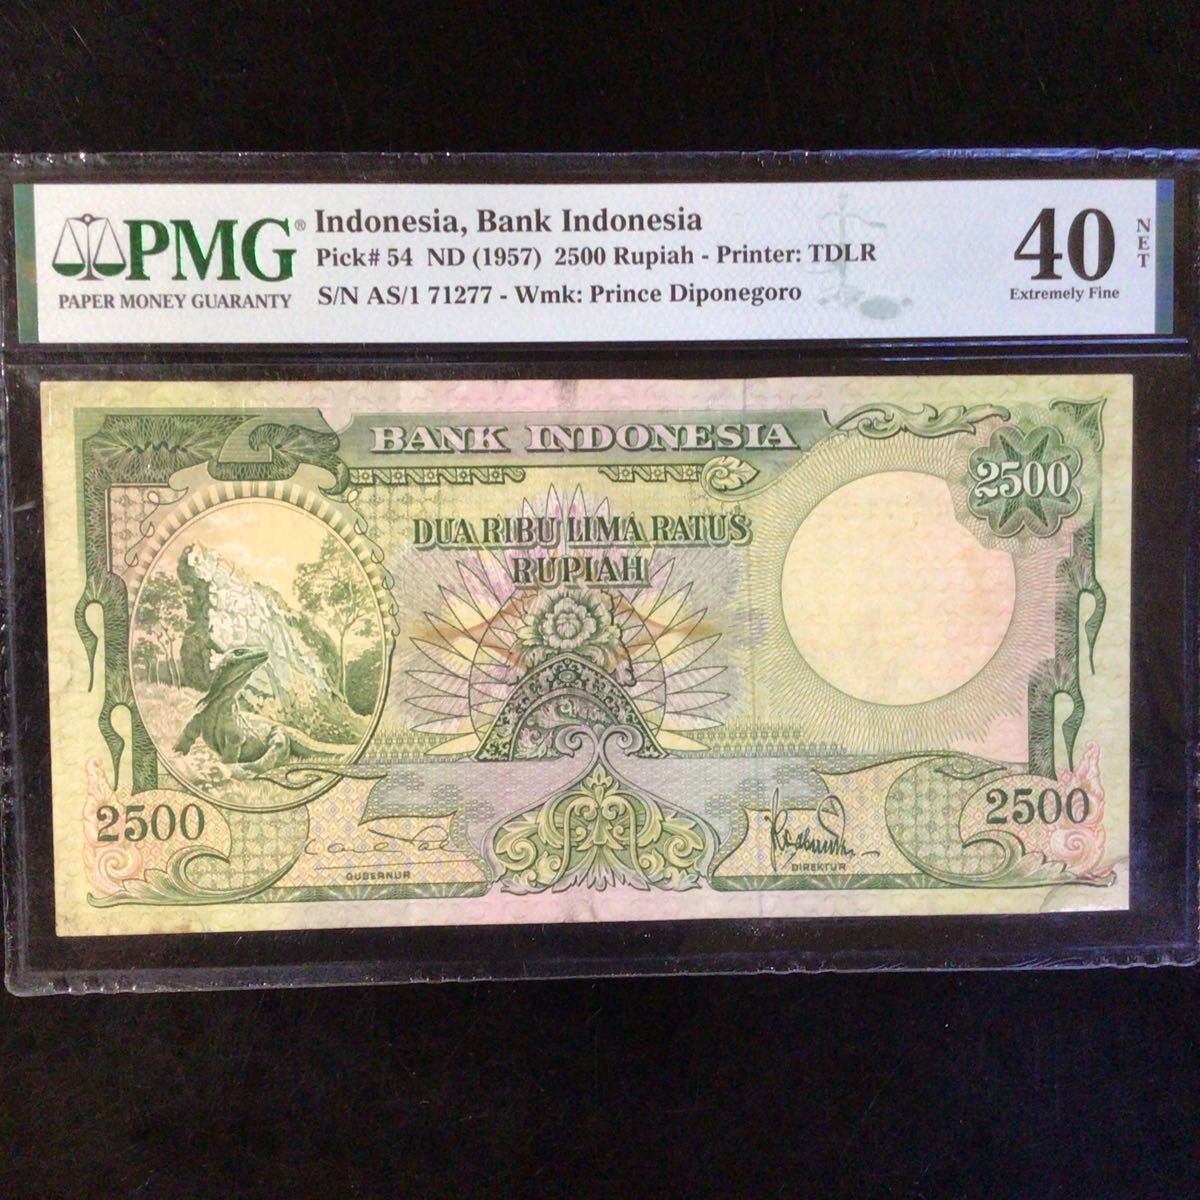 World Banknote Grading INDONESIA《Bank Indonesia》 2500 Rupiah【1957】『PMG Grading Extremely Fine 40 NET』